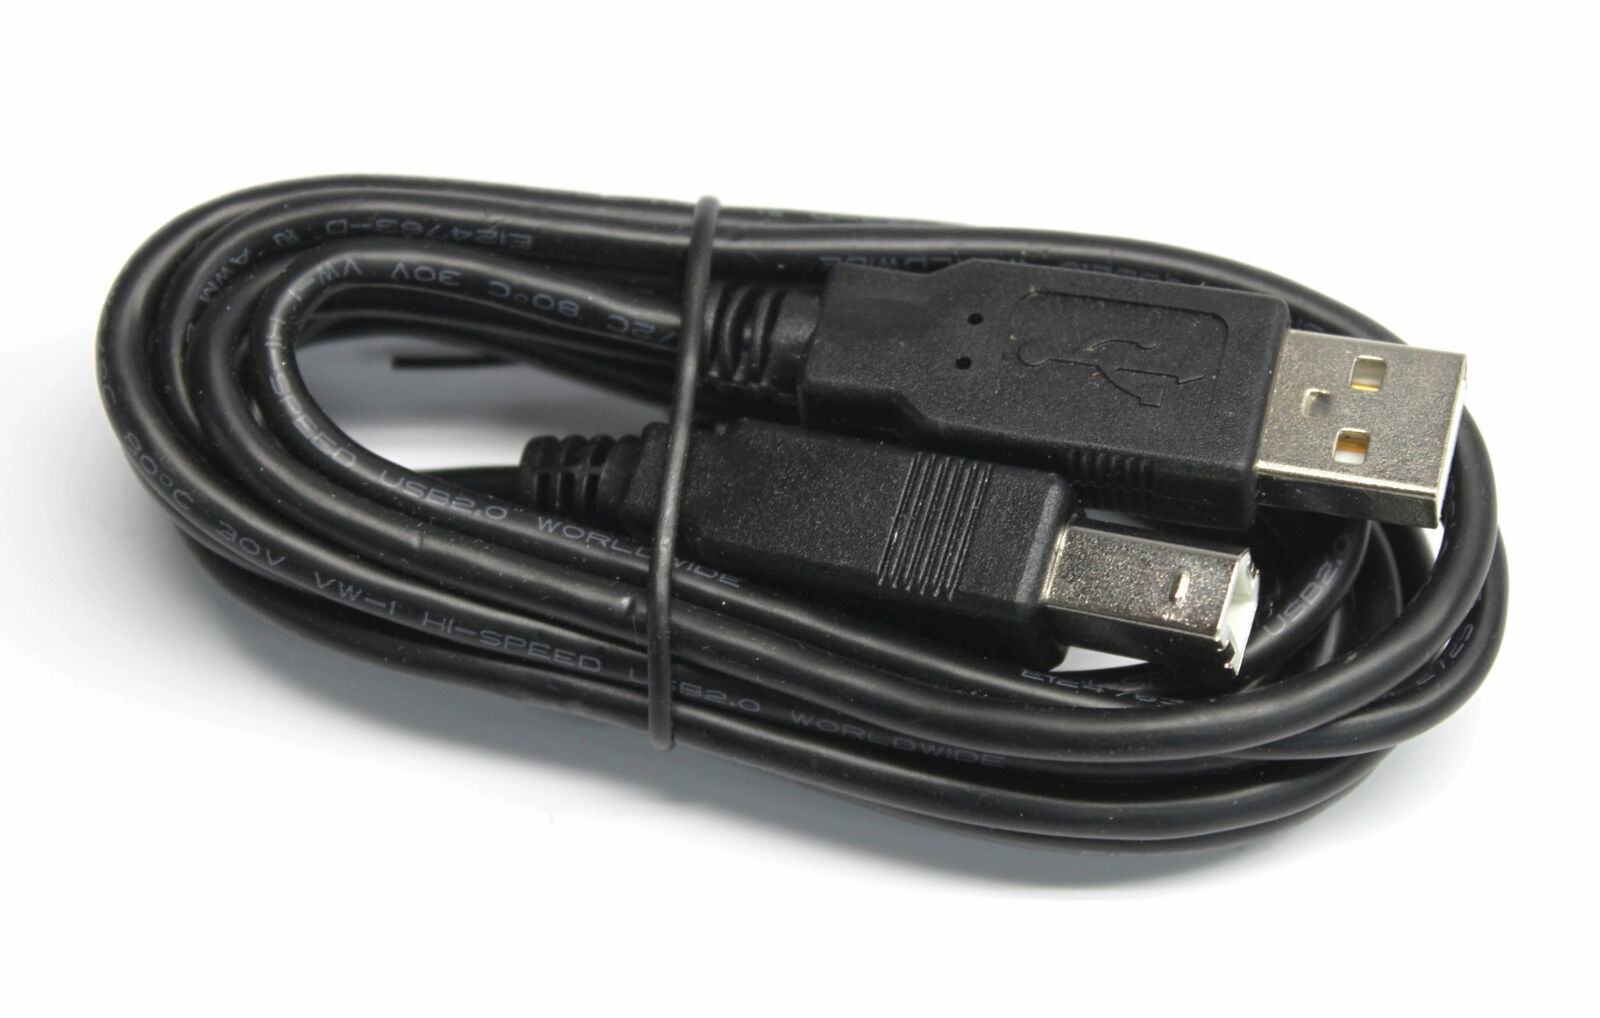 RocketBus USB Cord Cable for Brother All-in-One Printers to Computer Laptop PC